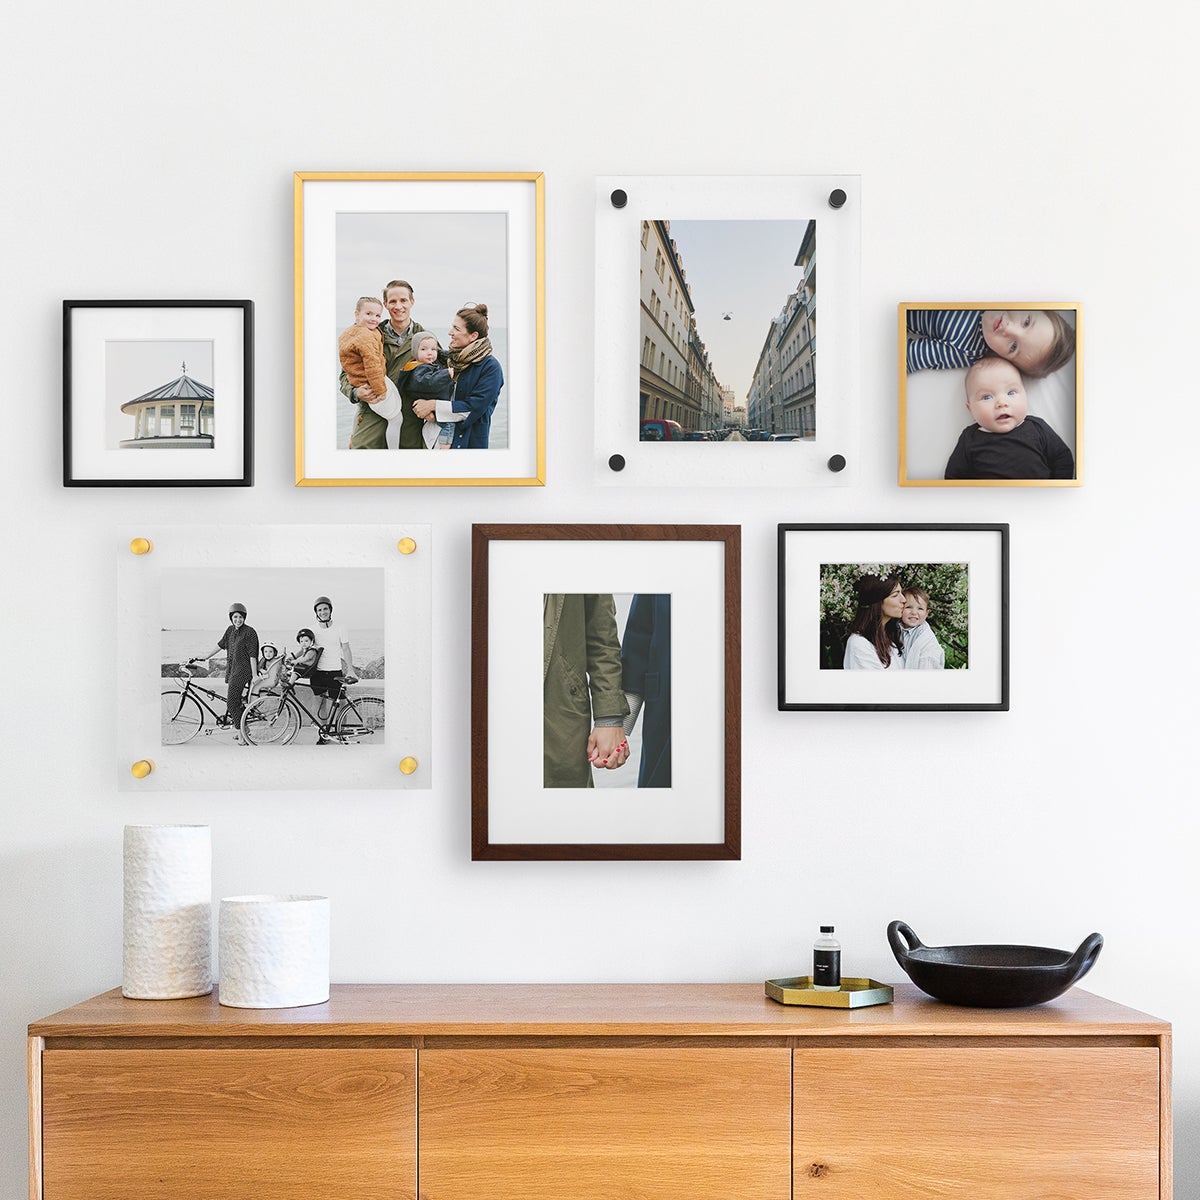 Gallery wall that mixes and matches sizes, styles, and finishes